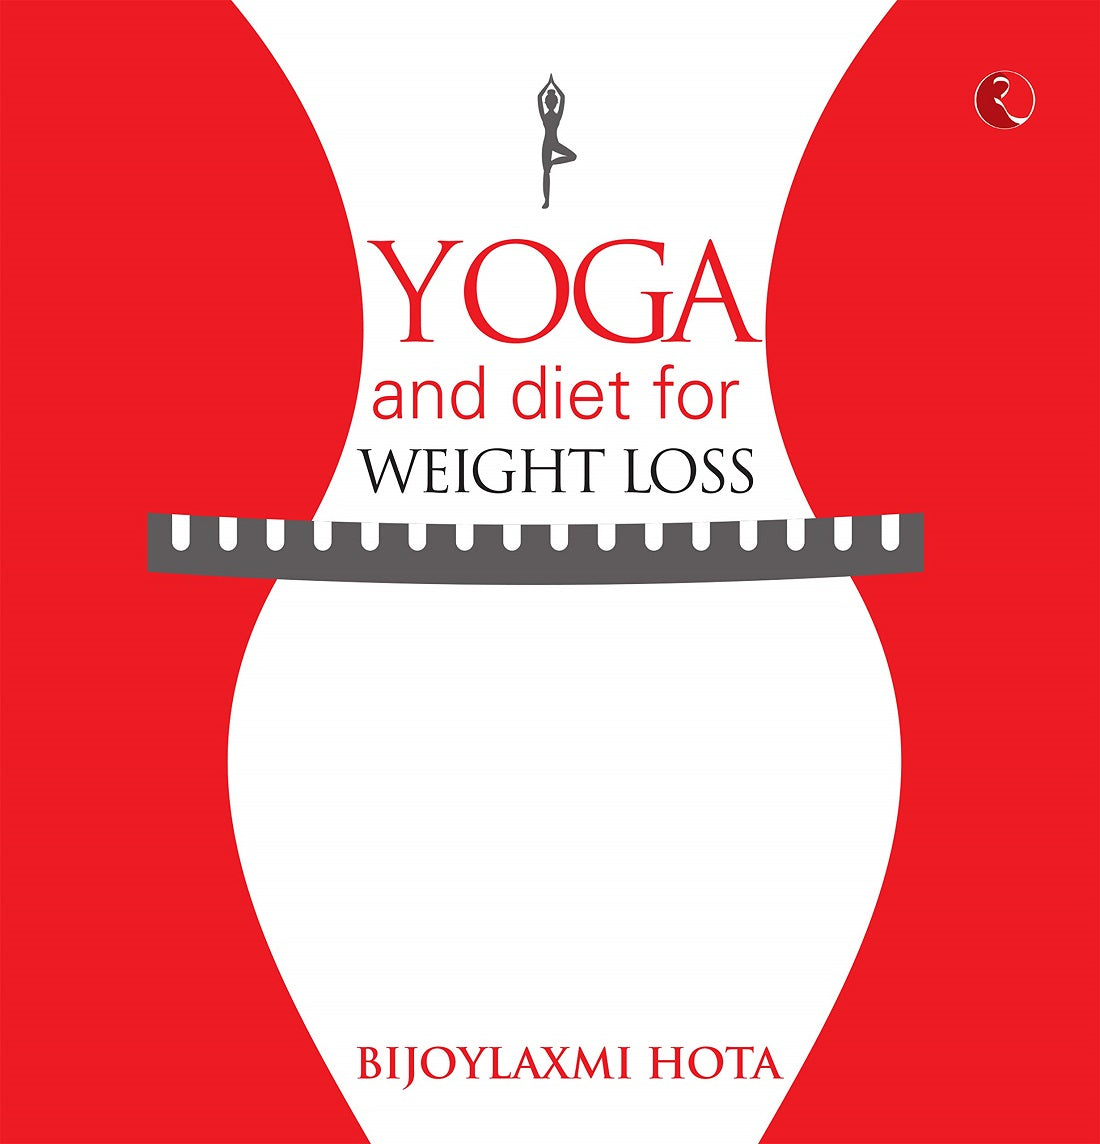 YOGA AND DIET FOR WEIGHT LOSS